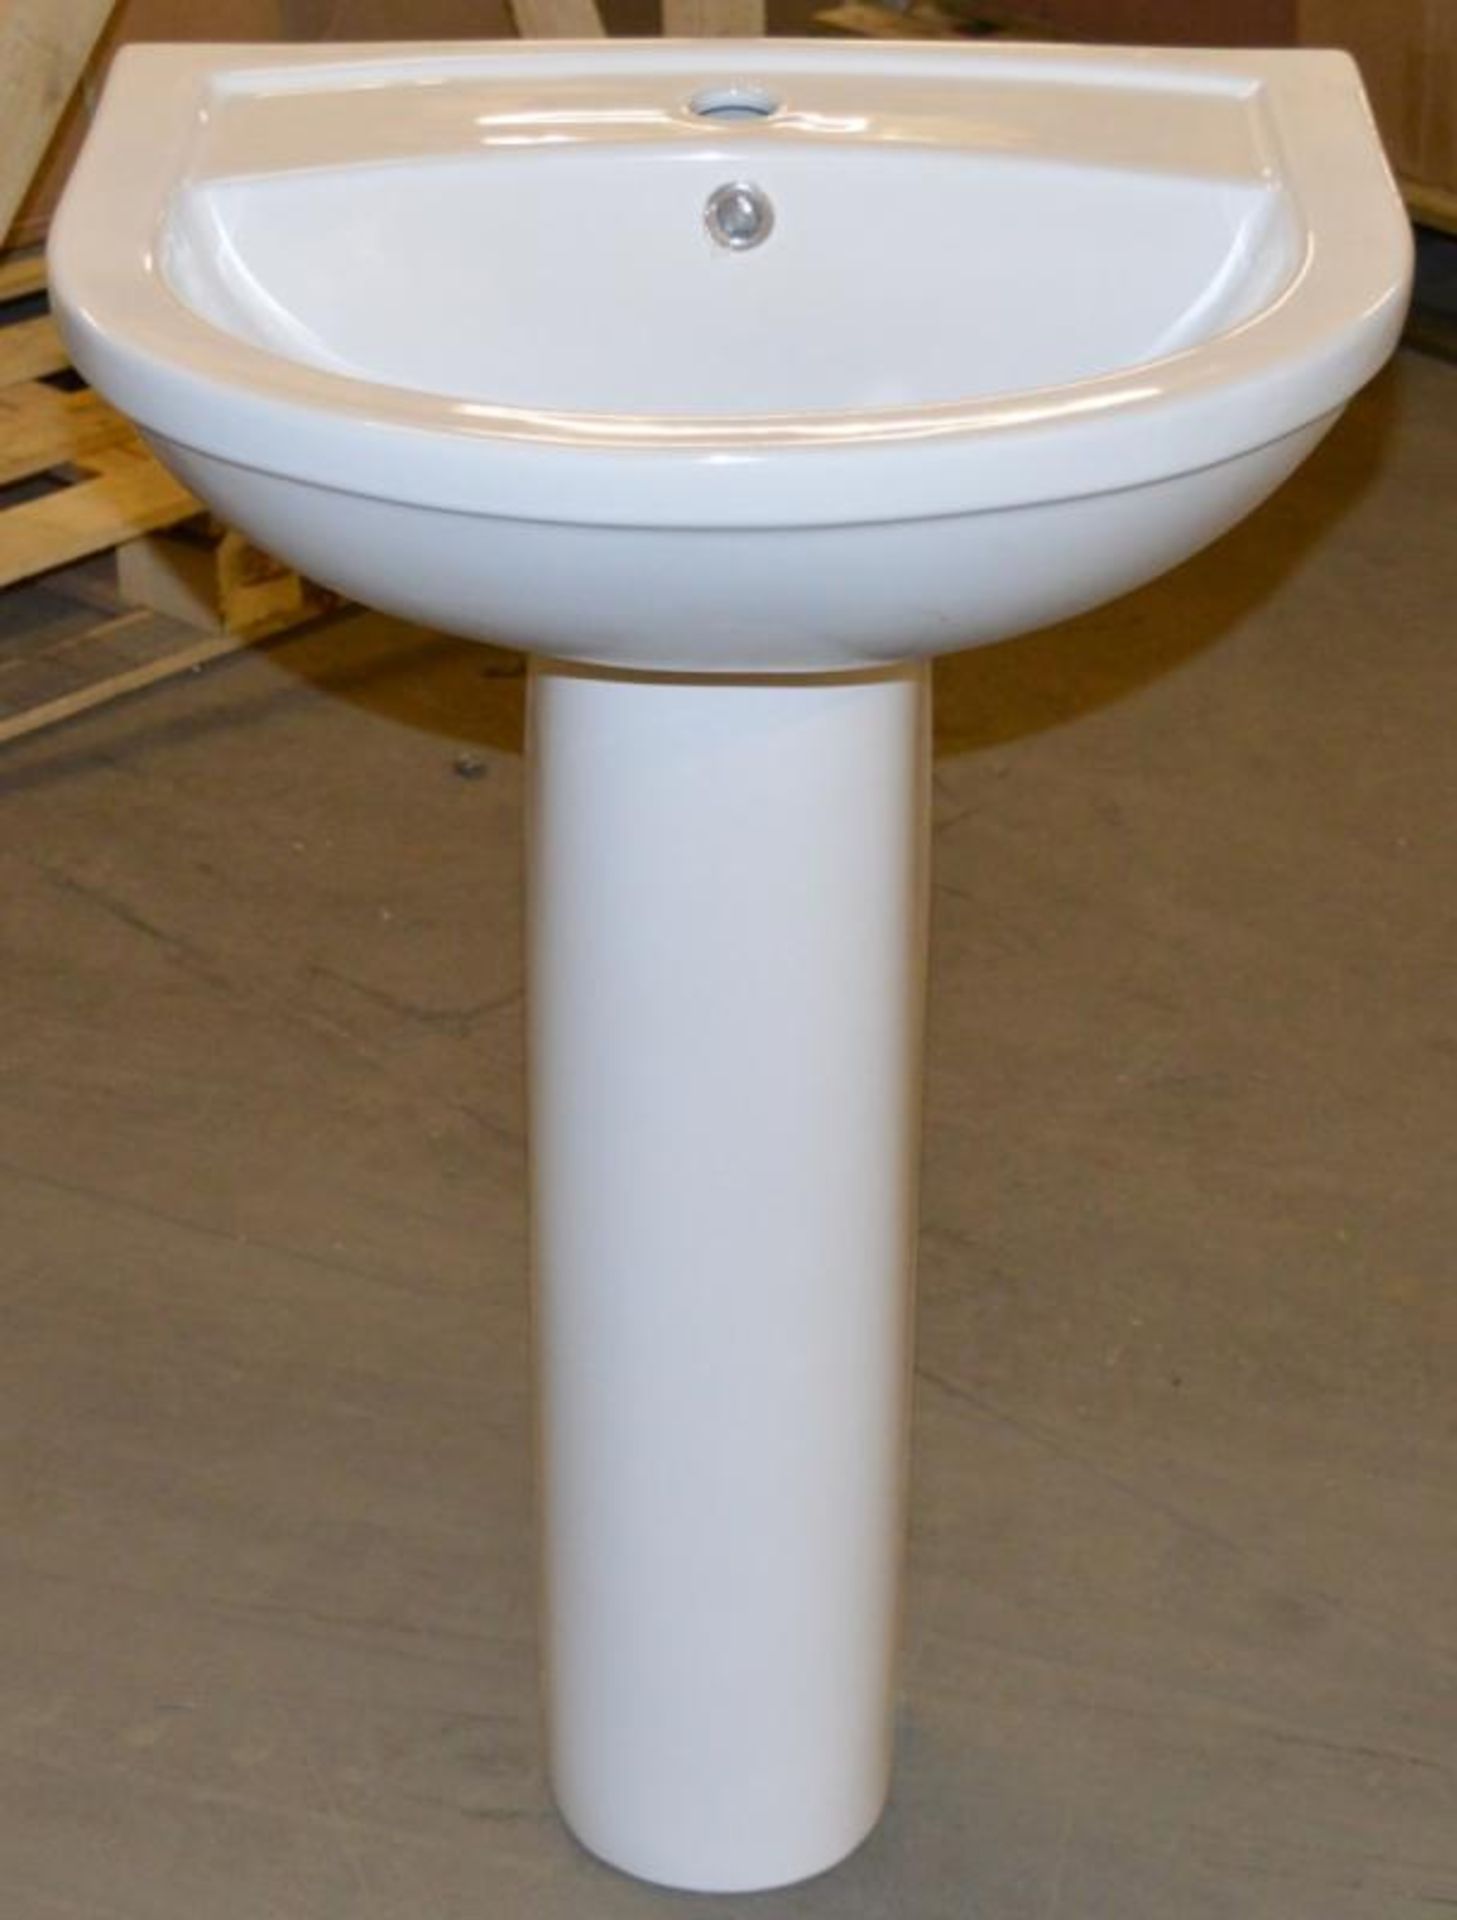 1 x Contemporary Sink Basin With Pedestal - Unused Boxed Stock - CL190 - Ref GIL036 - Location: